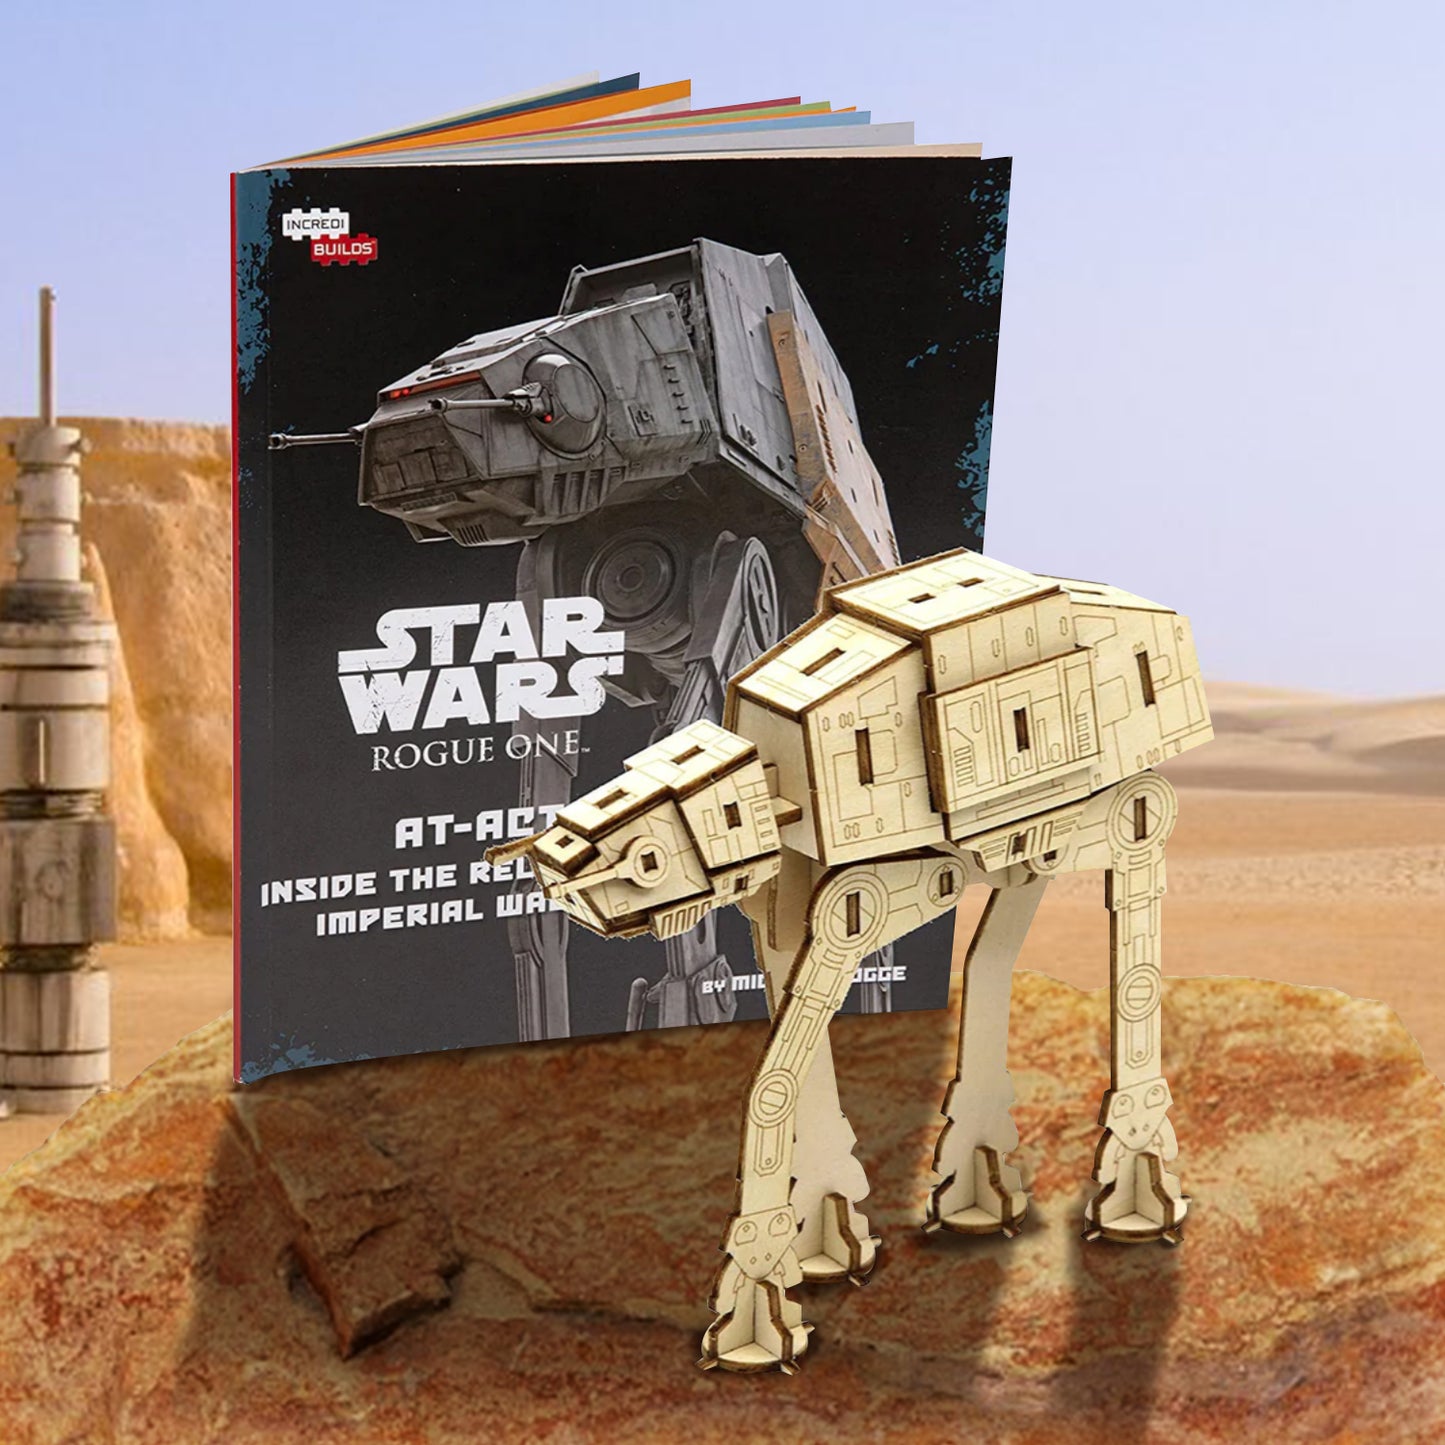 A wooden model At-At Walker from the Star Wars movies, standing on a rock in a desert. Next to it is a booklet with assembly instructions.